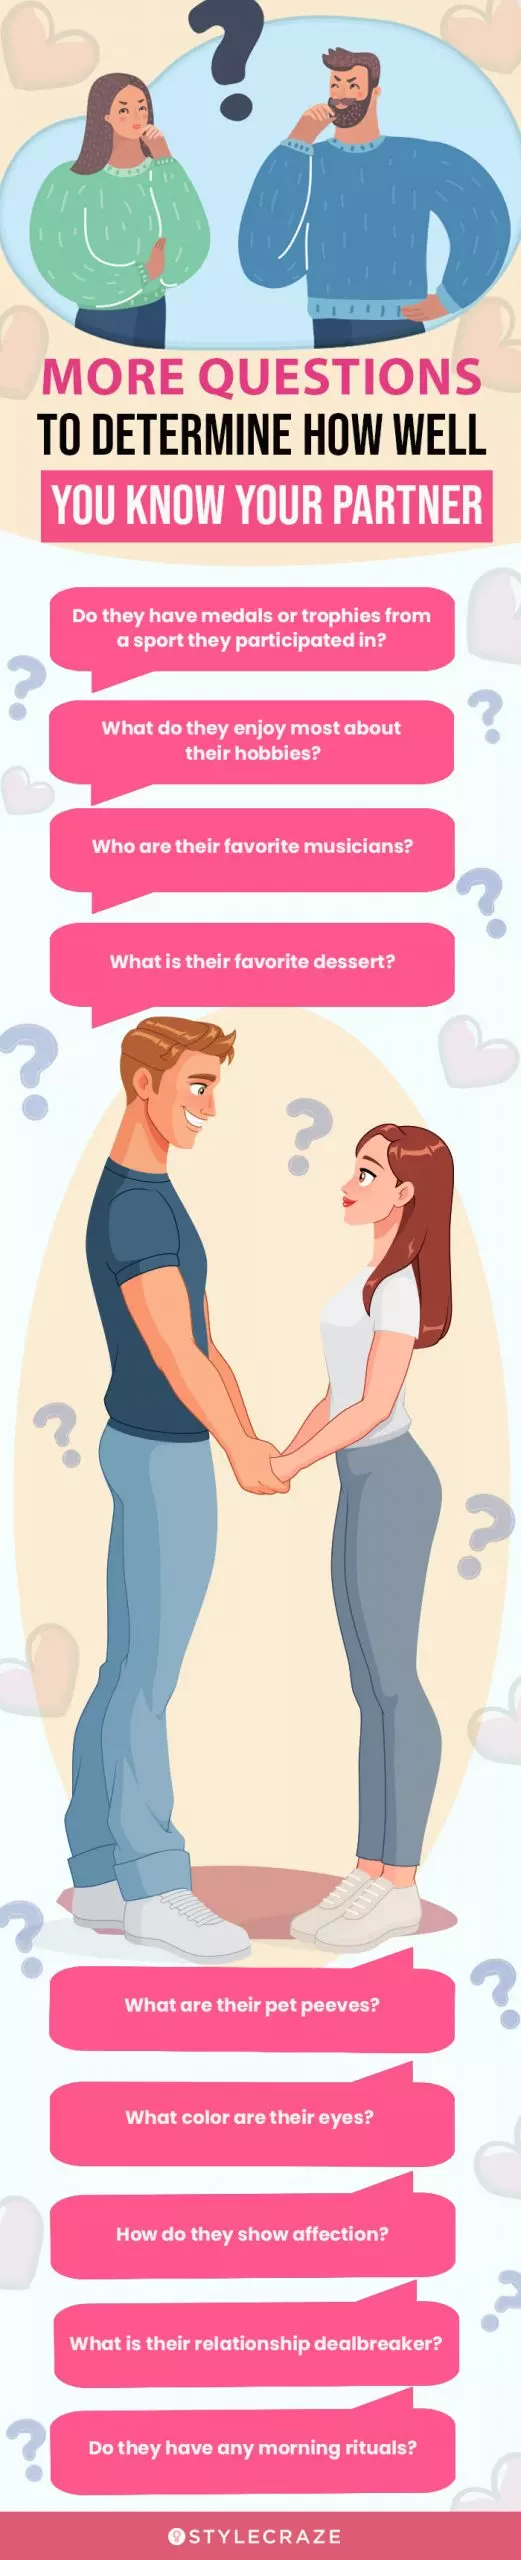 more questions to determine how well you know your partner (infographic)